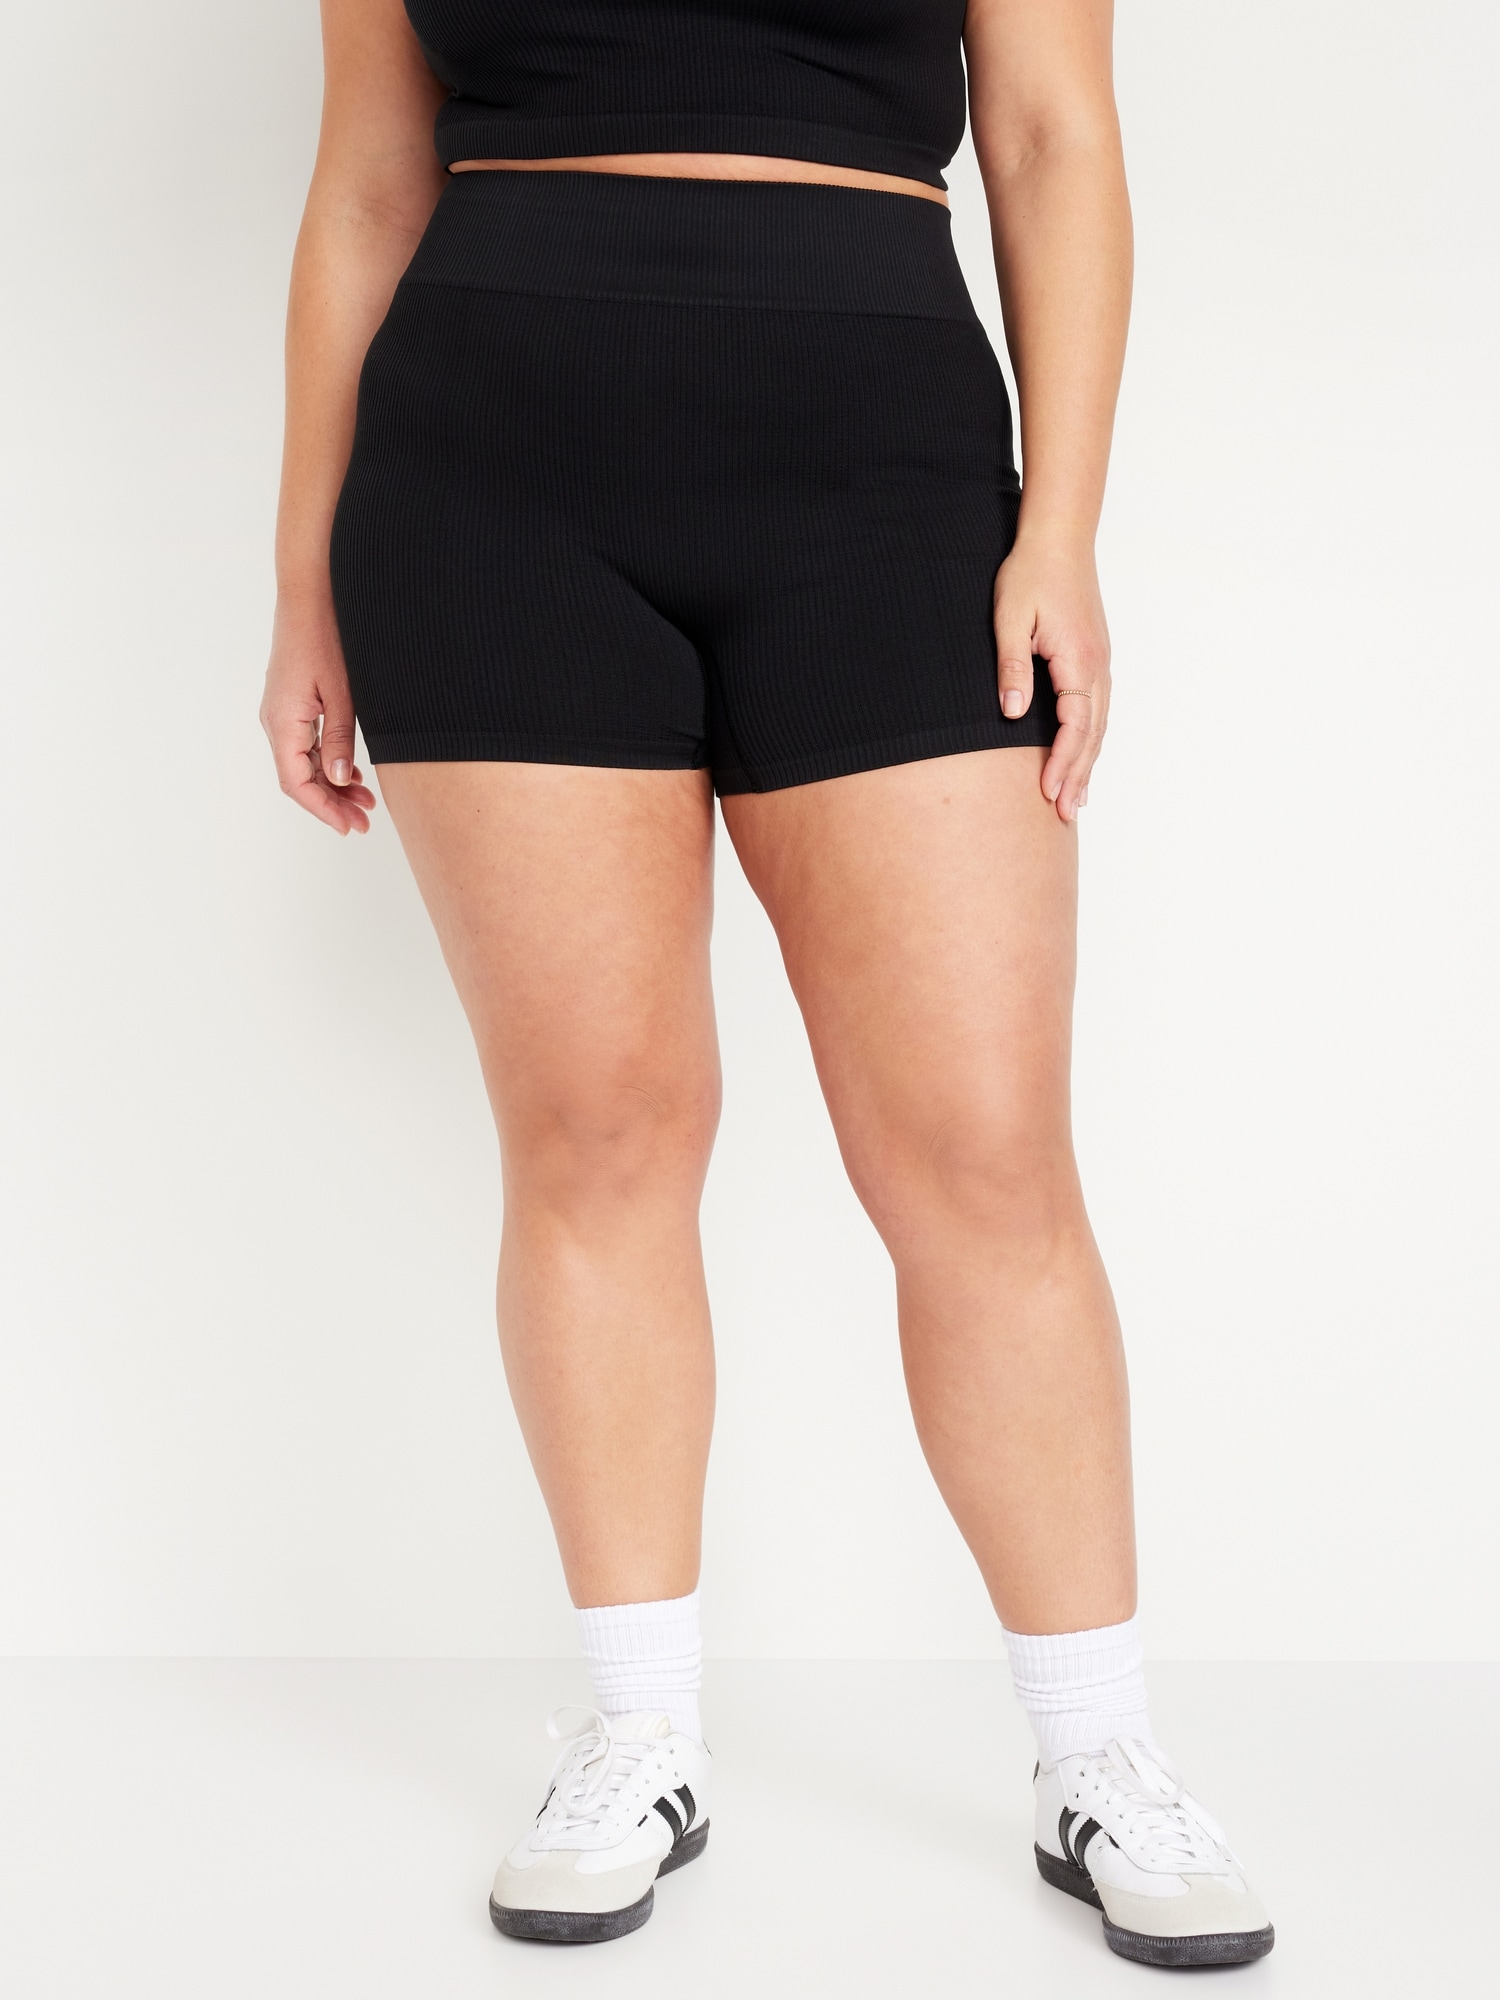 Extra High-Waisted Seamless Ribbed Biker Shorts -- 4-inch inseam